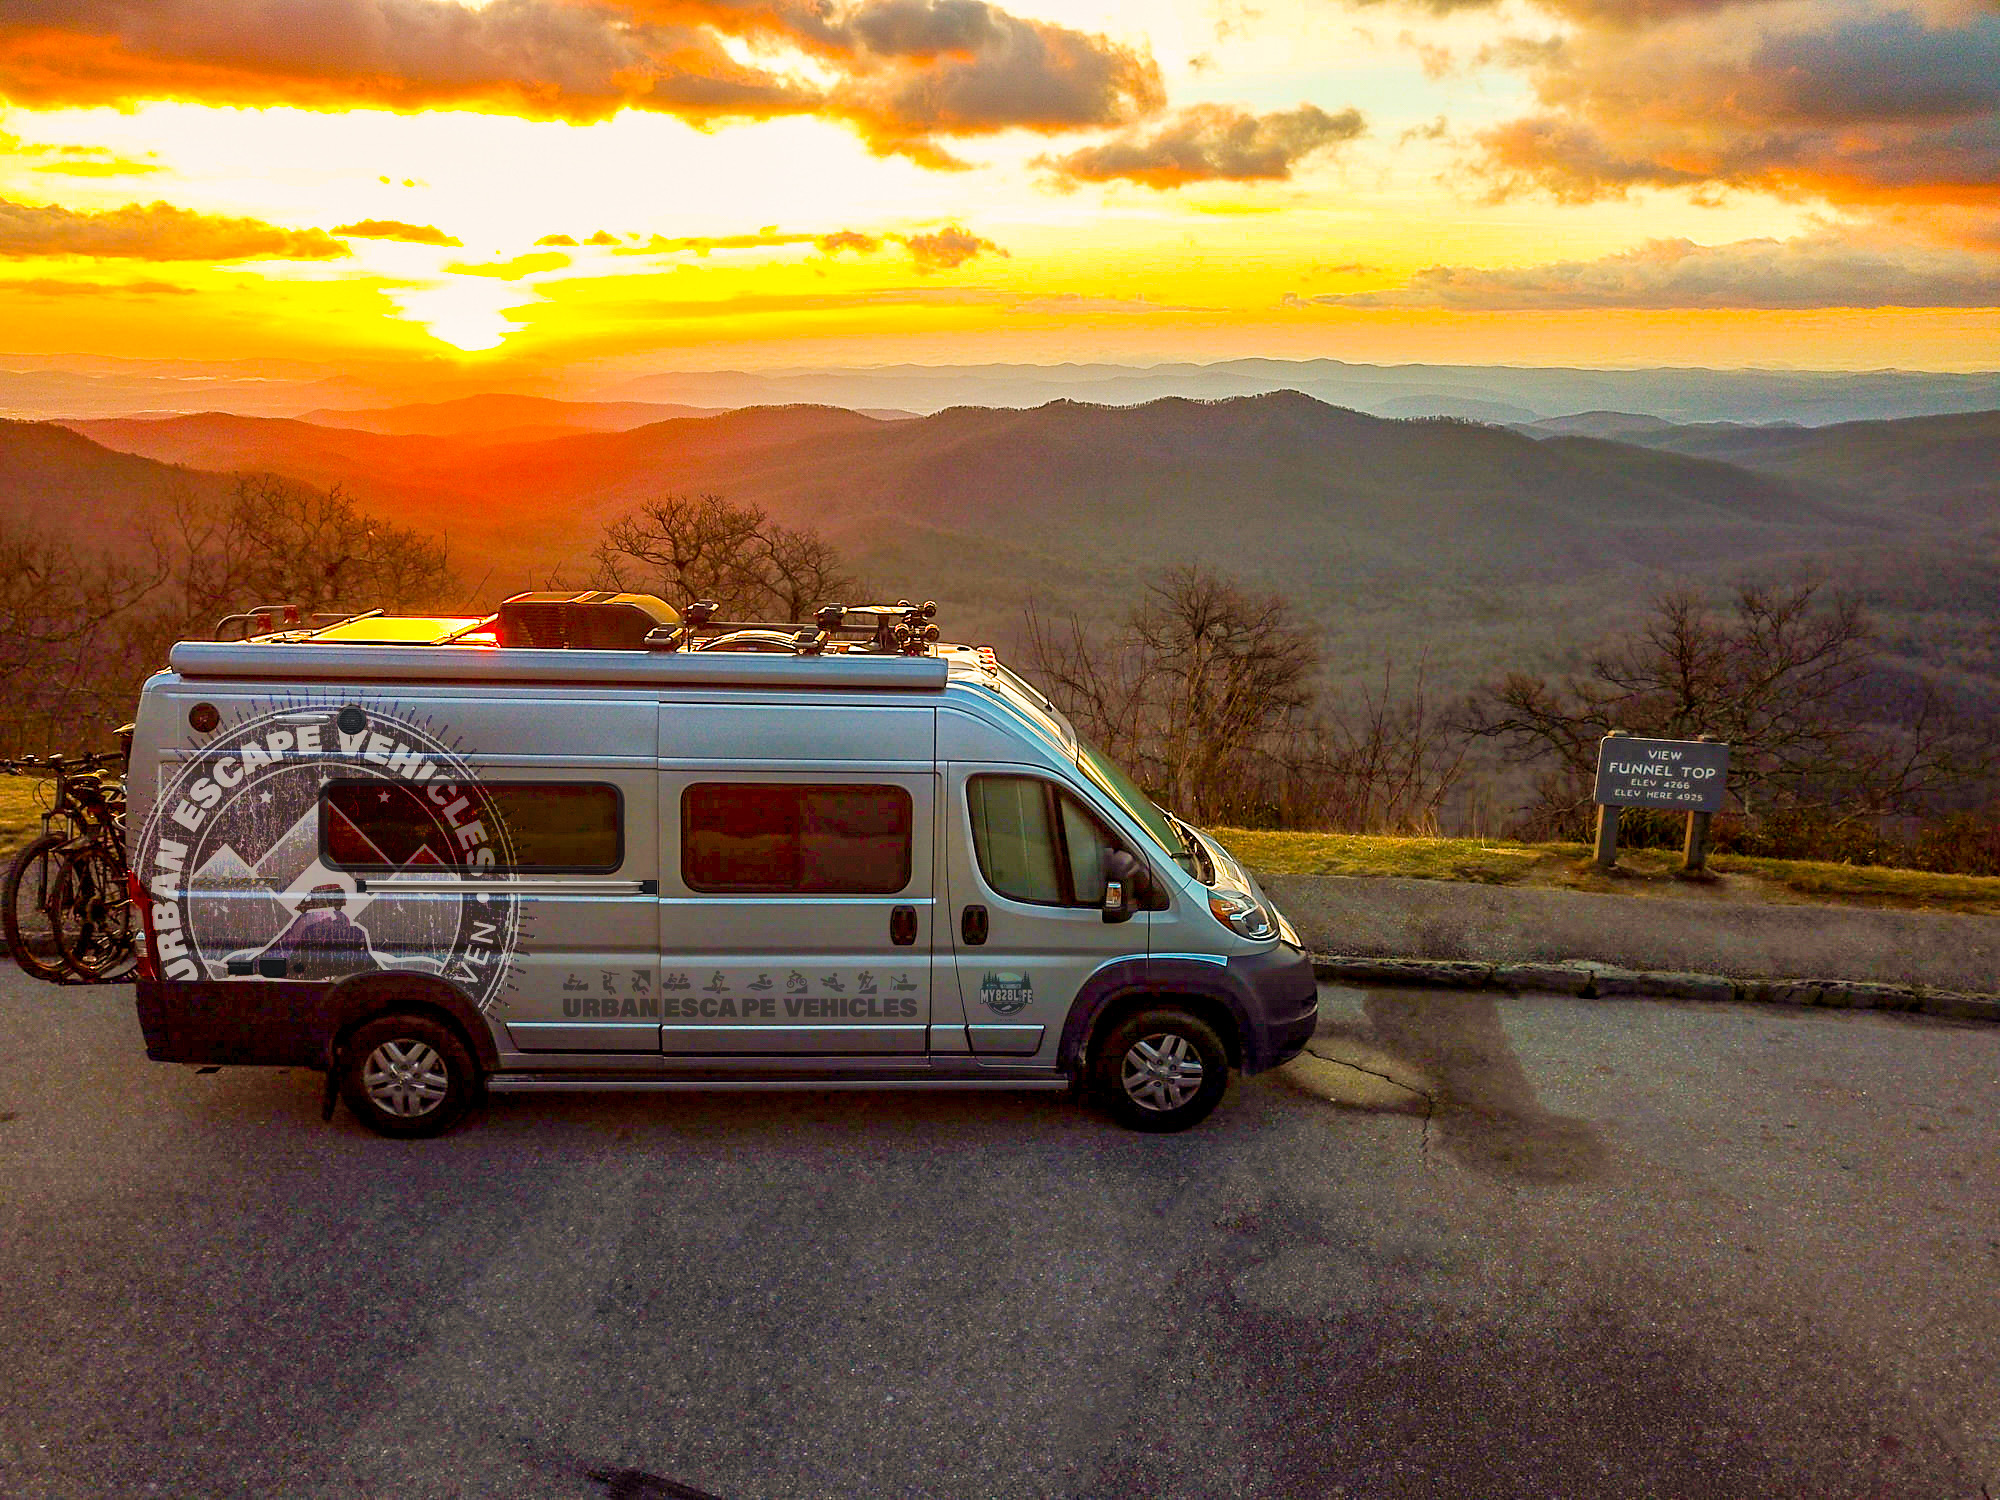 Support Your Wanderlust for Adventure and Travel in an Urban Escape Vehicle, with Melody King